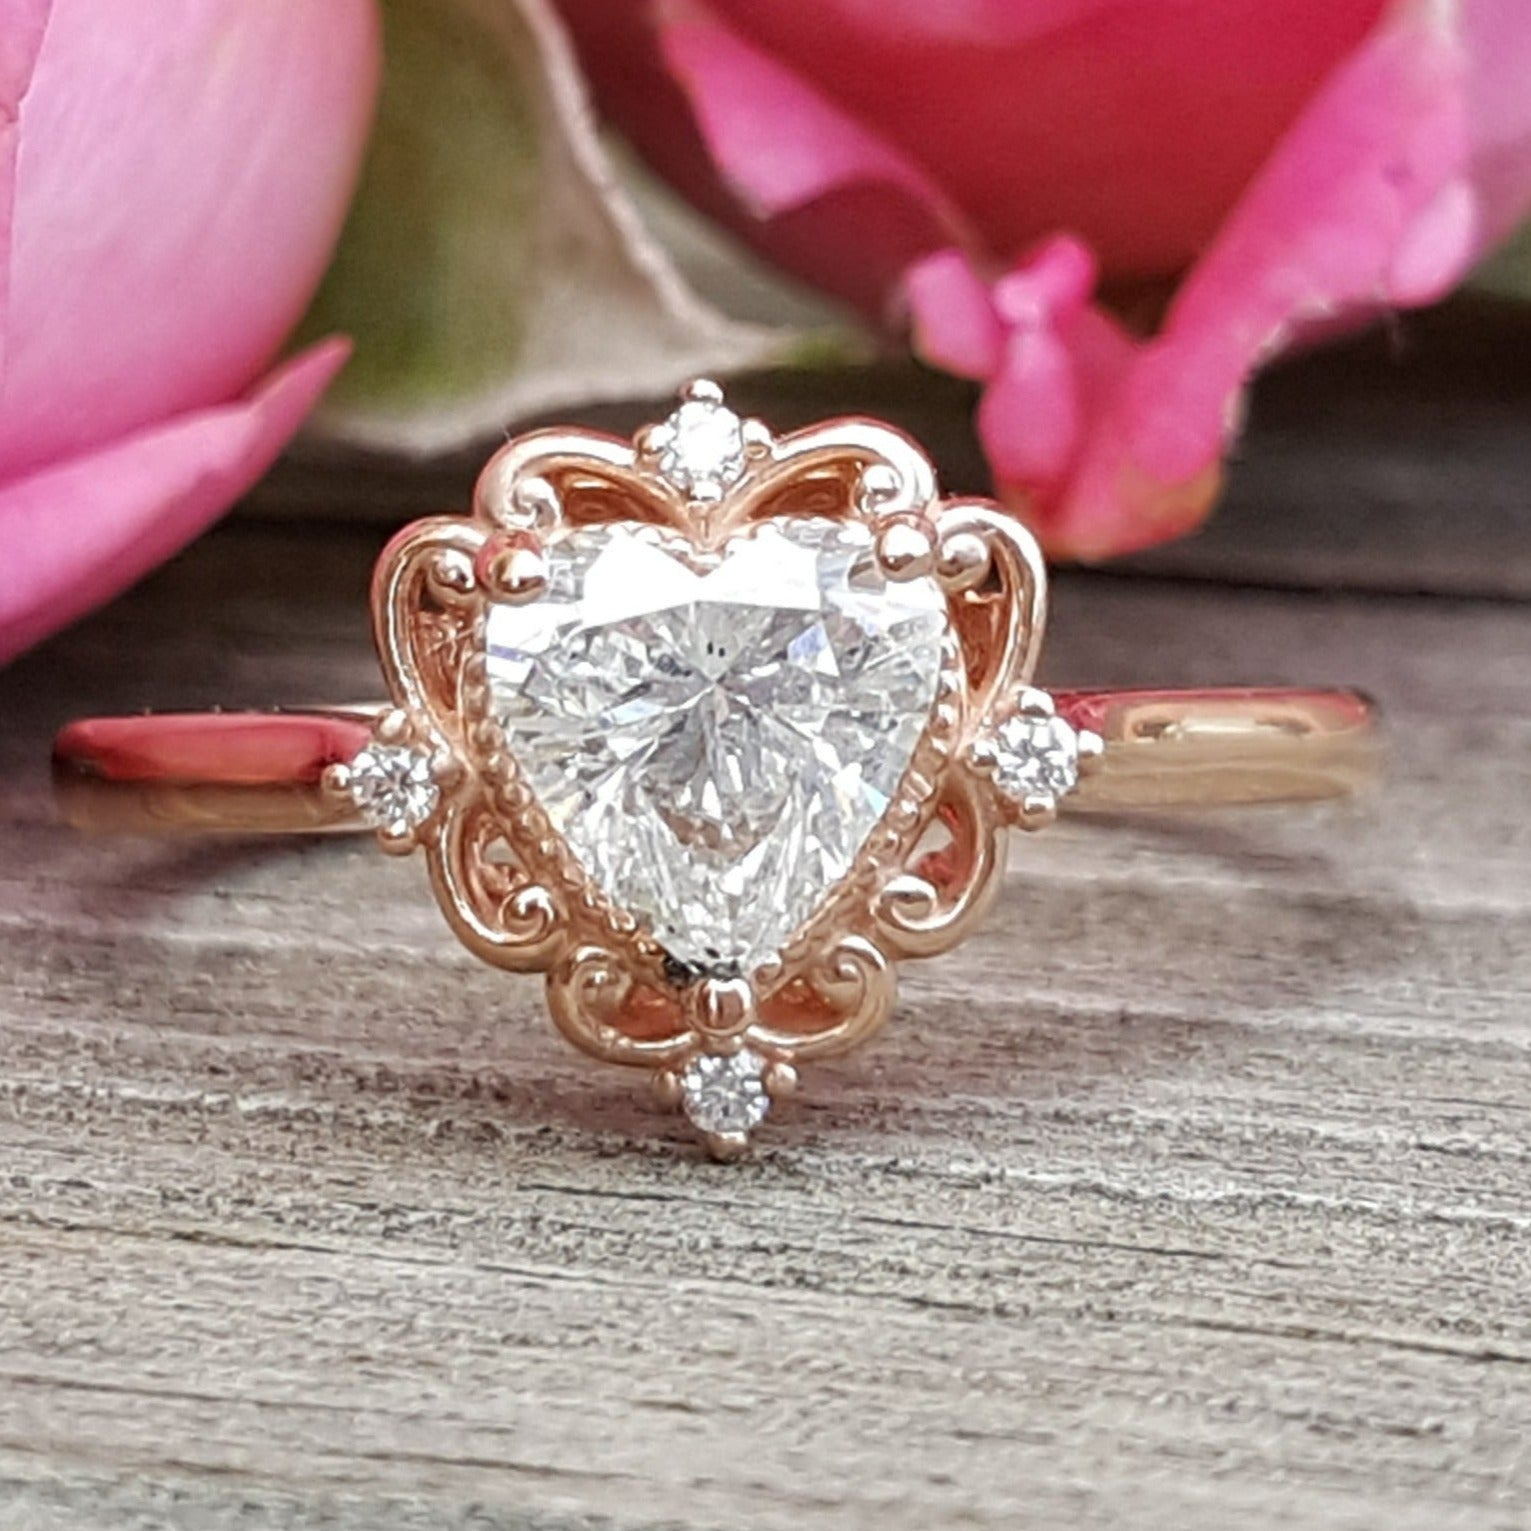 Designer Platinum Solitaire Engagement Ring with a Touch of Rose Gold